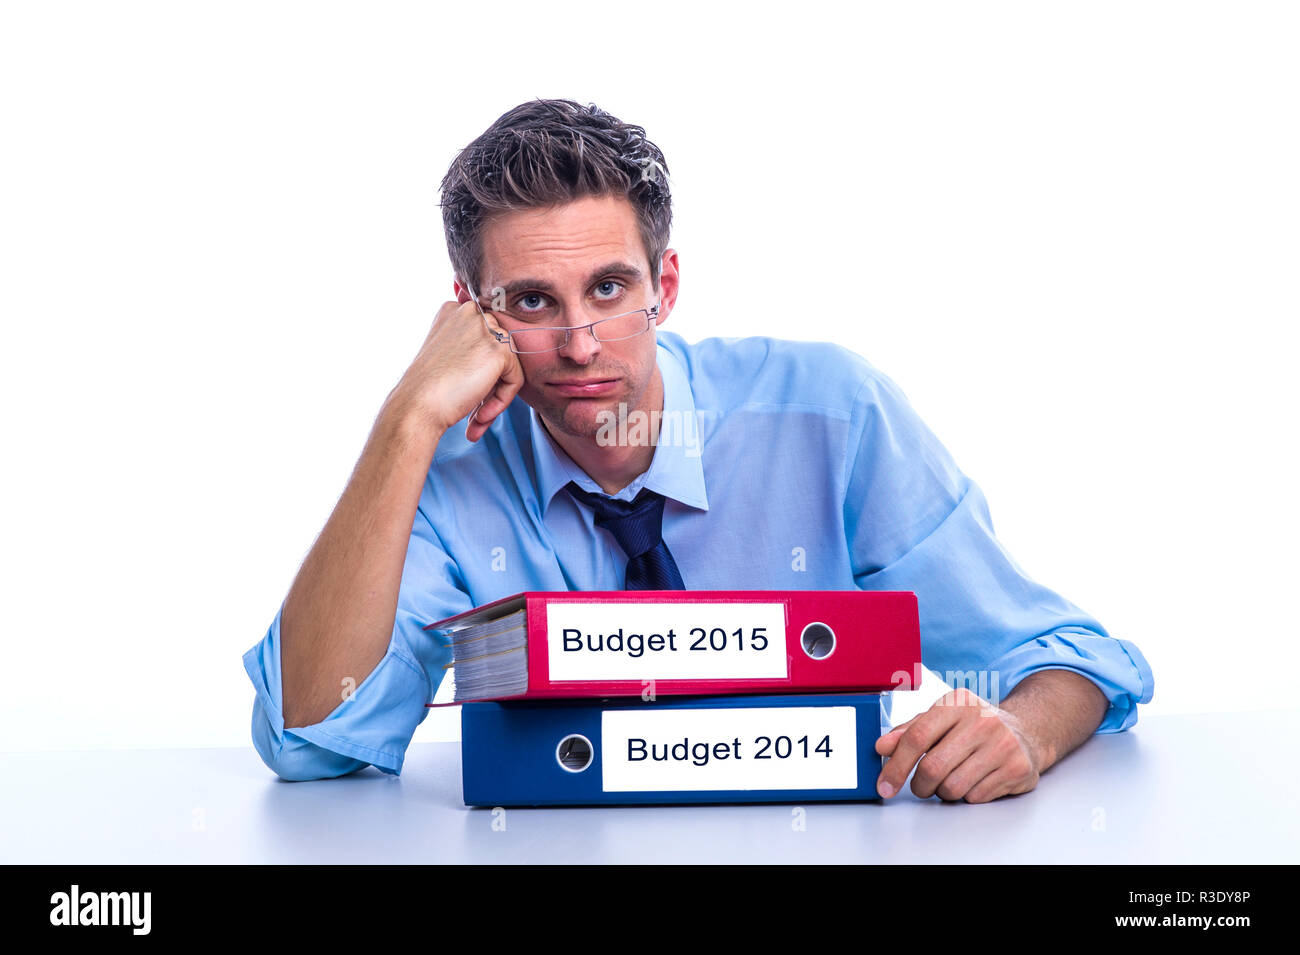 budget 2014 and budget 2015 Stock Photo